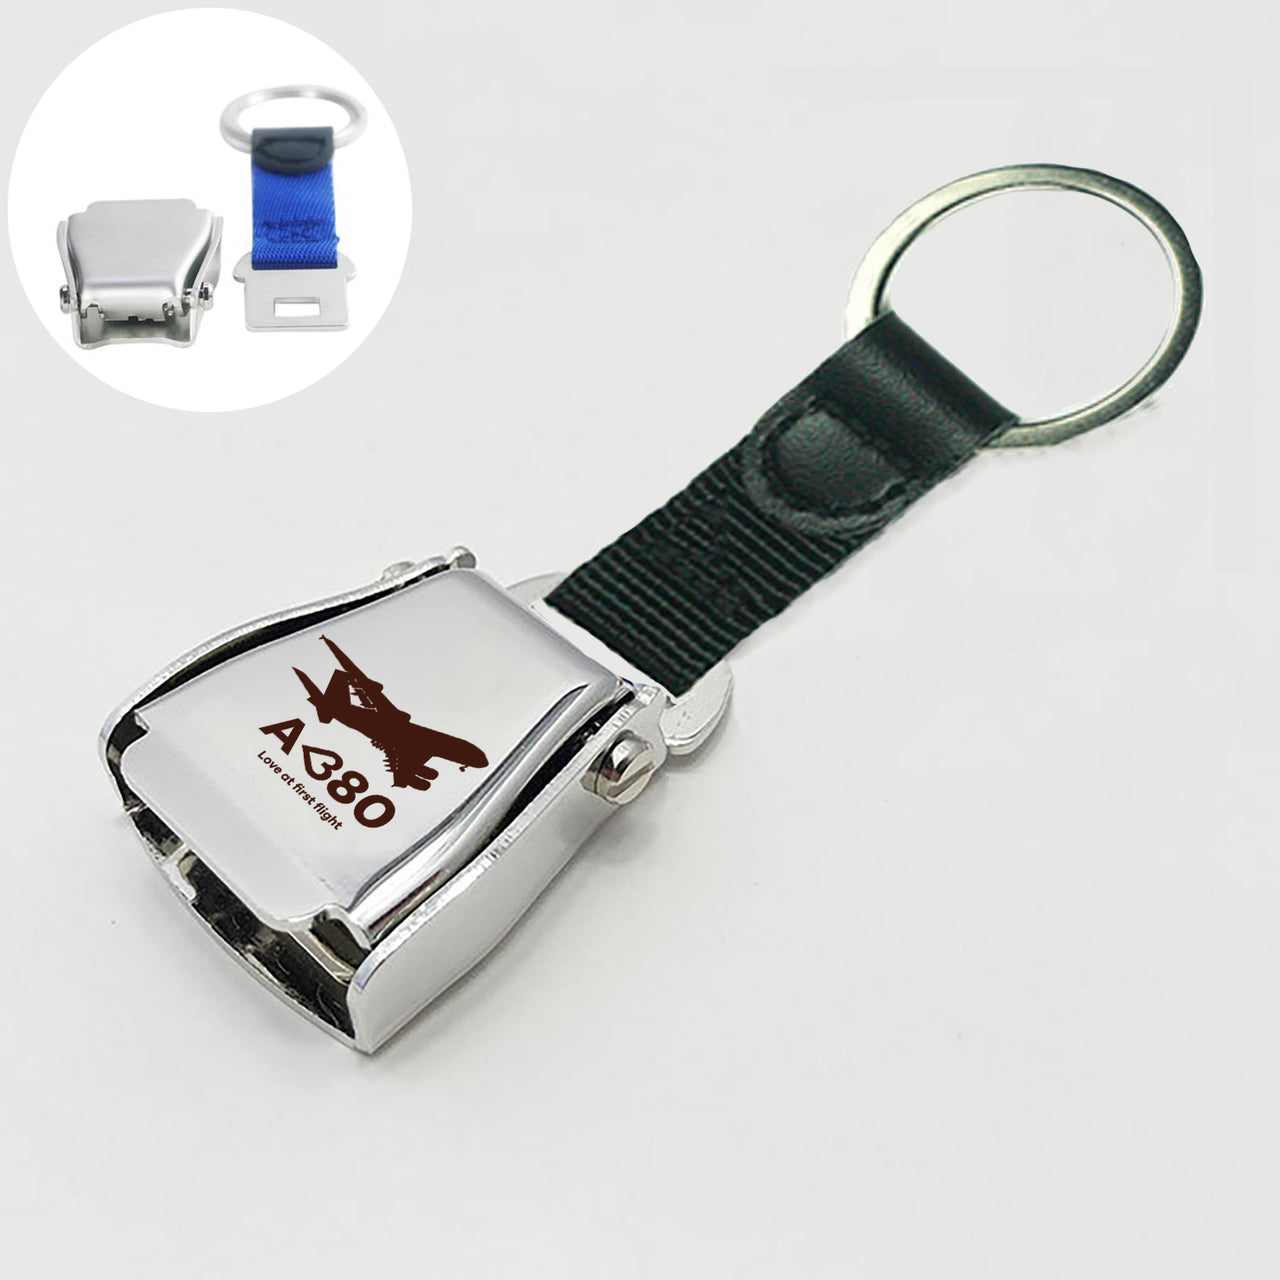 Airbus A380 Love at first flight Designed Airplane Seat Belt Key Chains